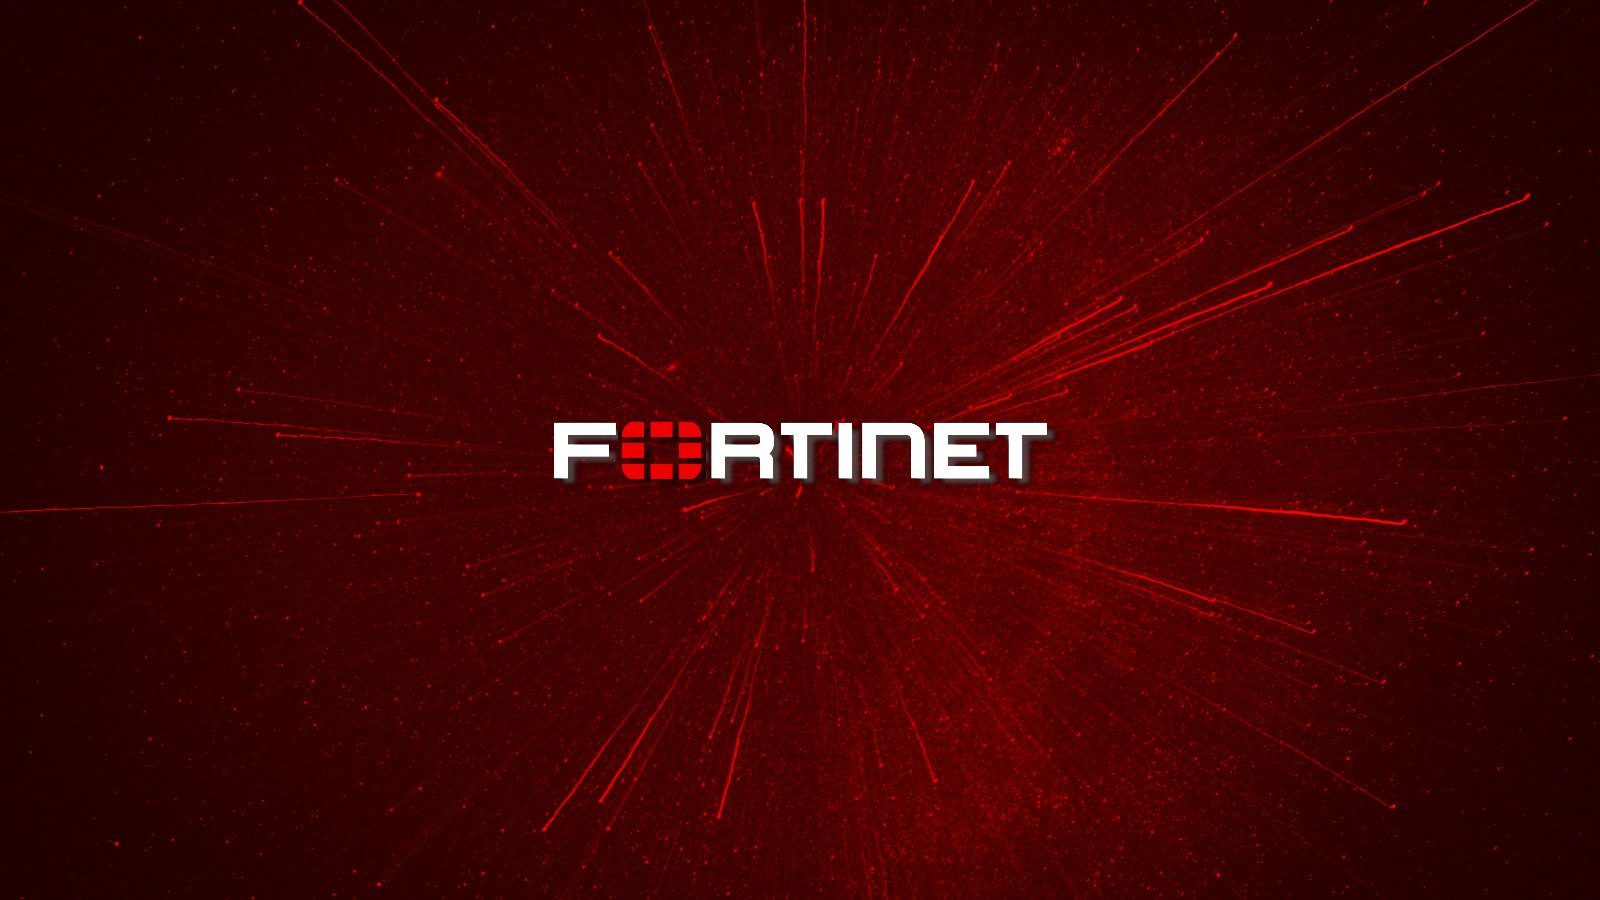 Fortinet warns of critical RCE flaw in FortiOS, FortiProxy devices – Source: www.bleepingcomputer.com